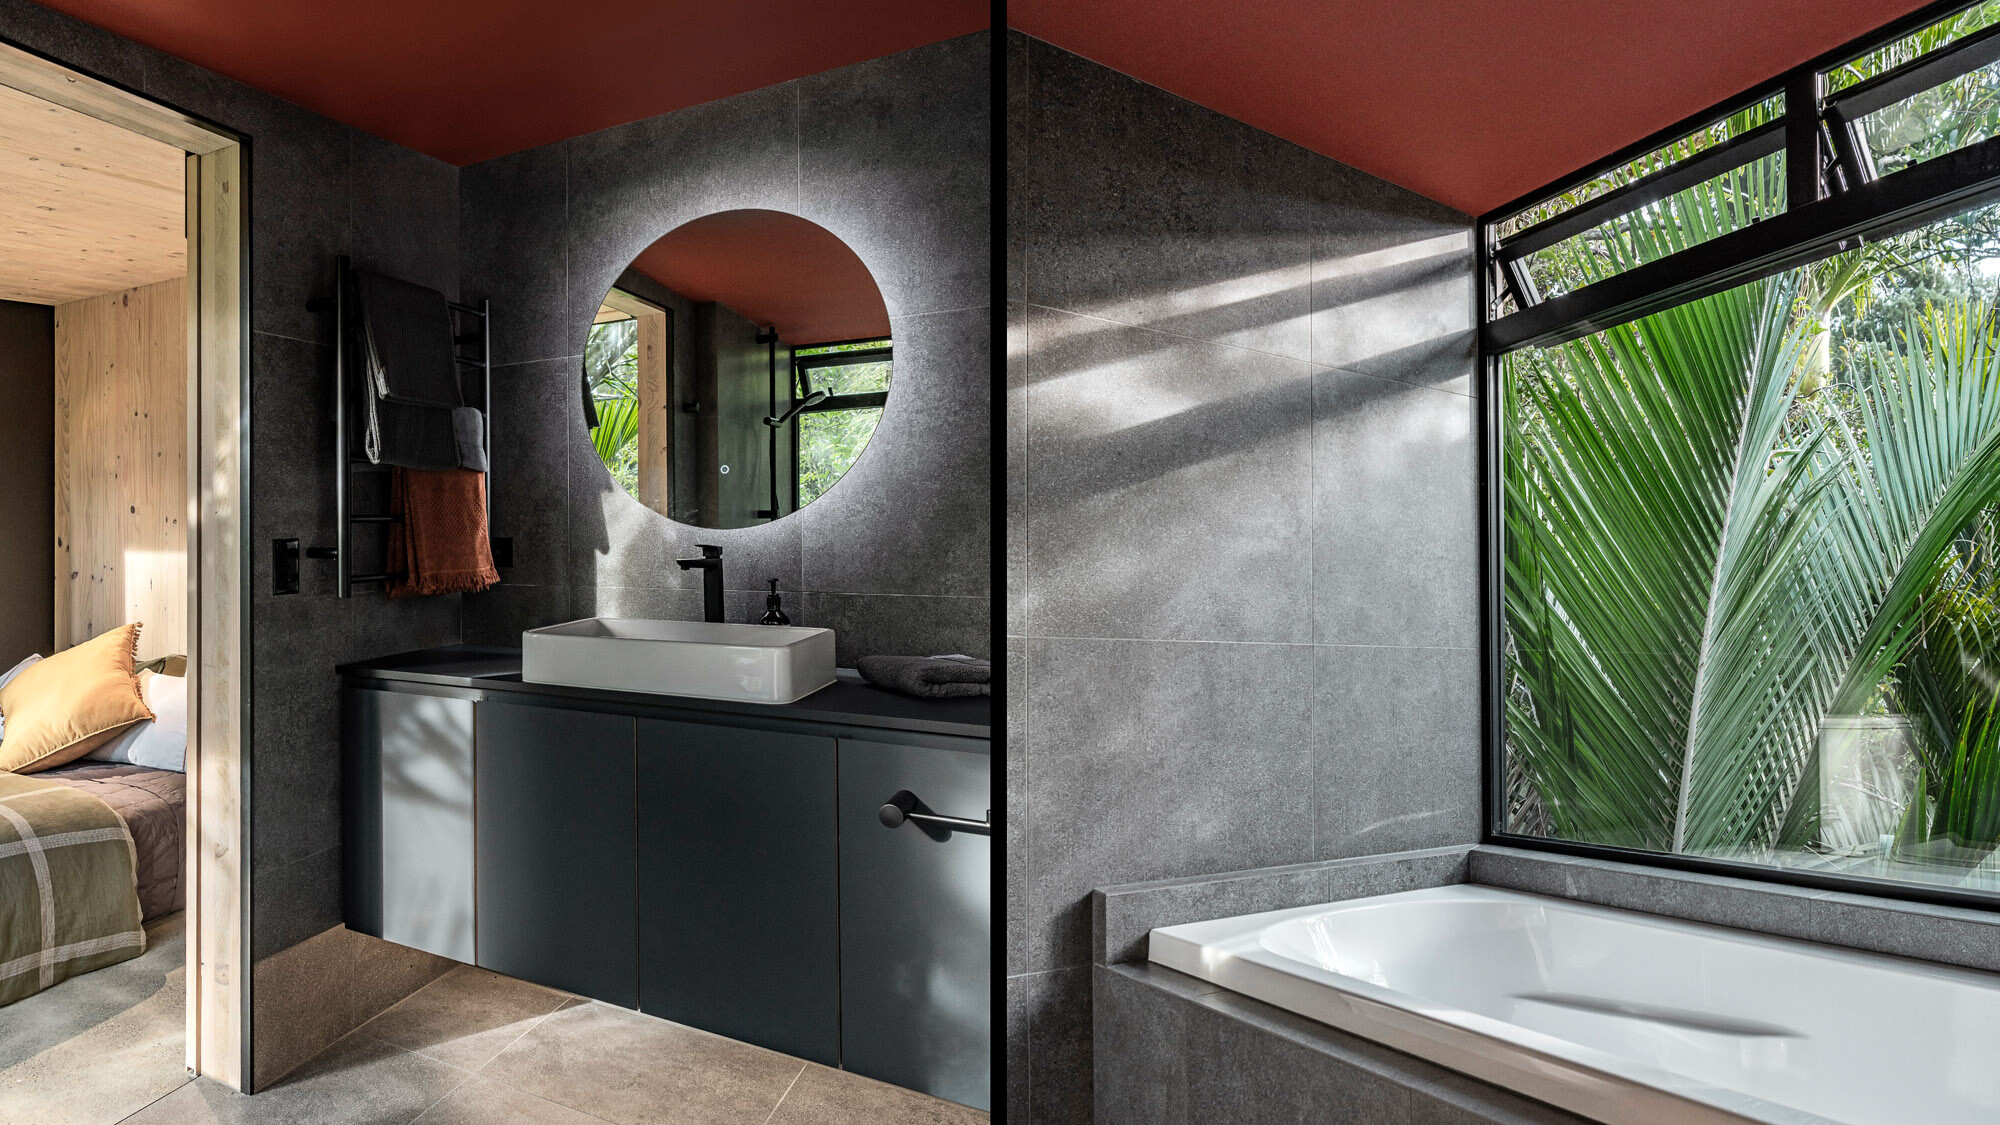 Details of the bathroom exhibiting various shades of grey.